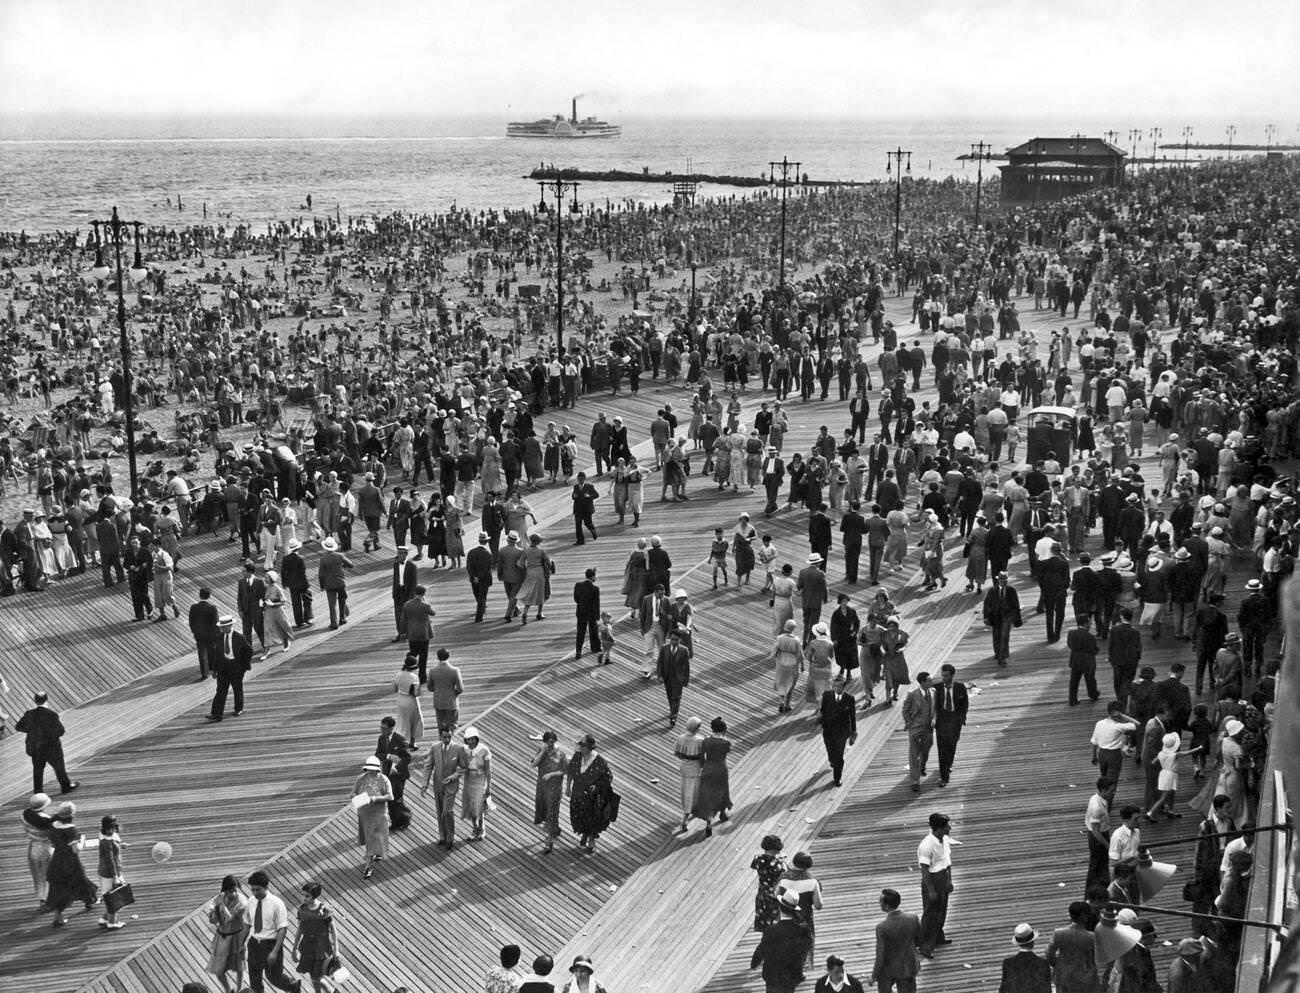 Coney Island In Brooklyn Can Have 400,000 Visitors On A Weekend Day, Circa 1933.